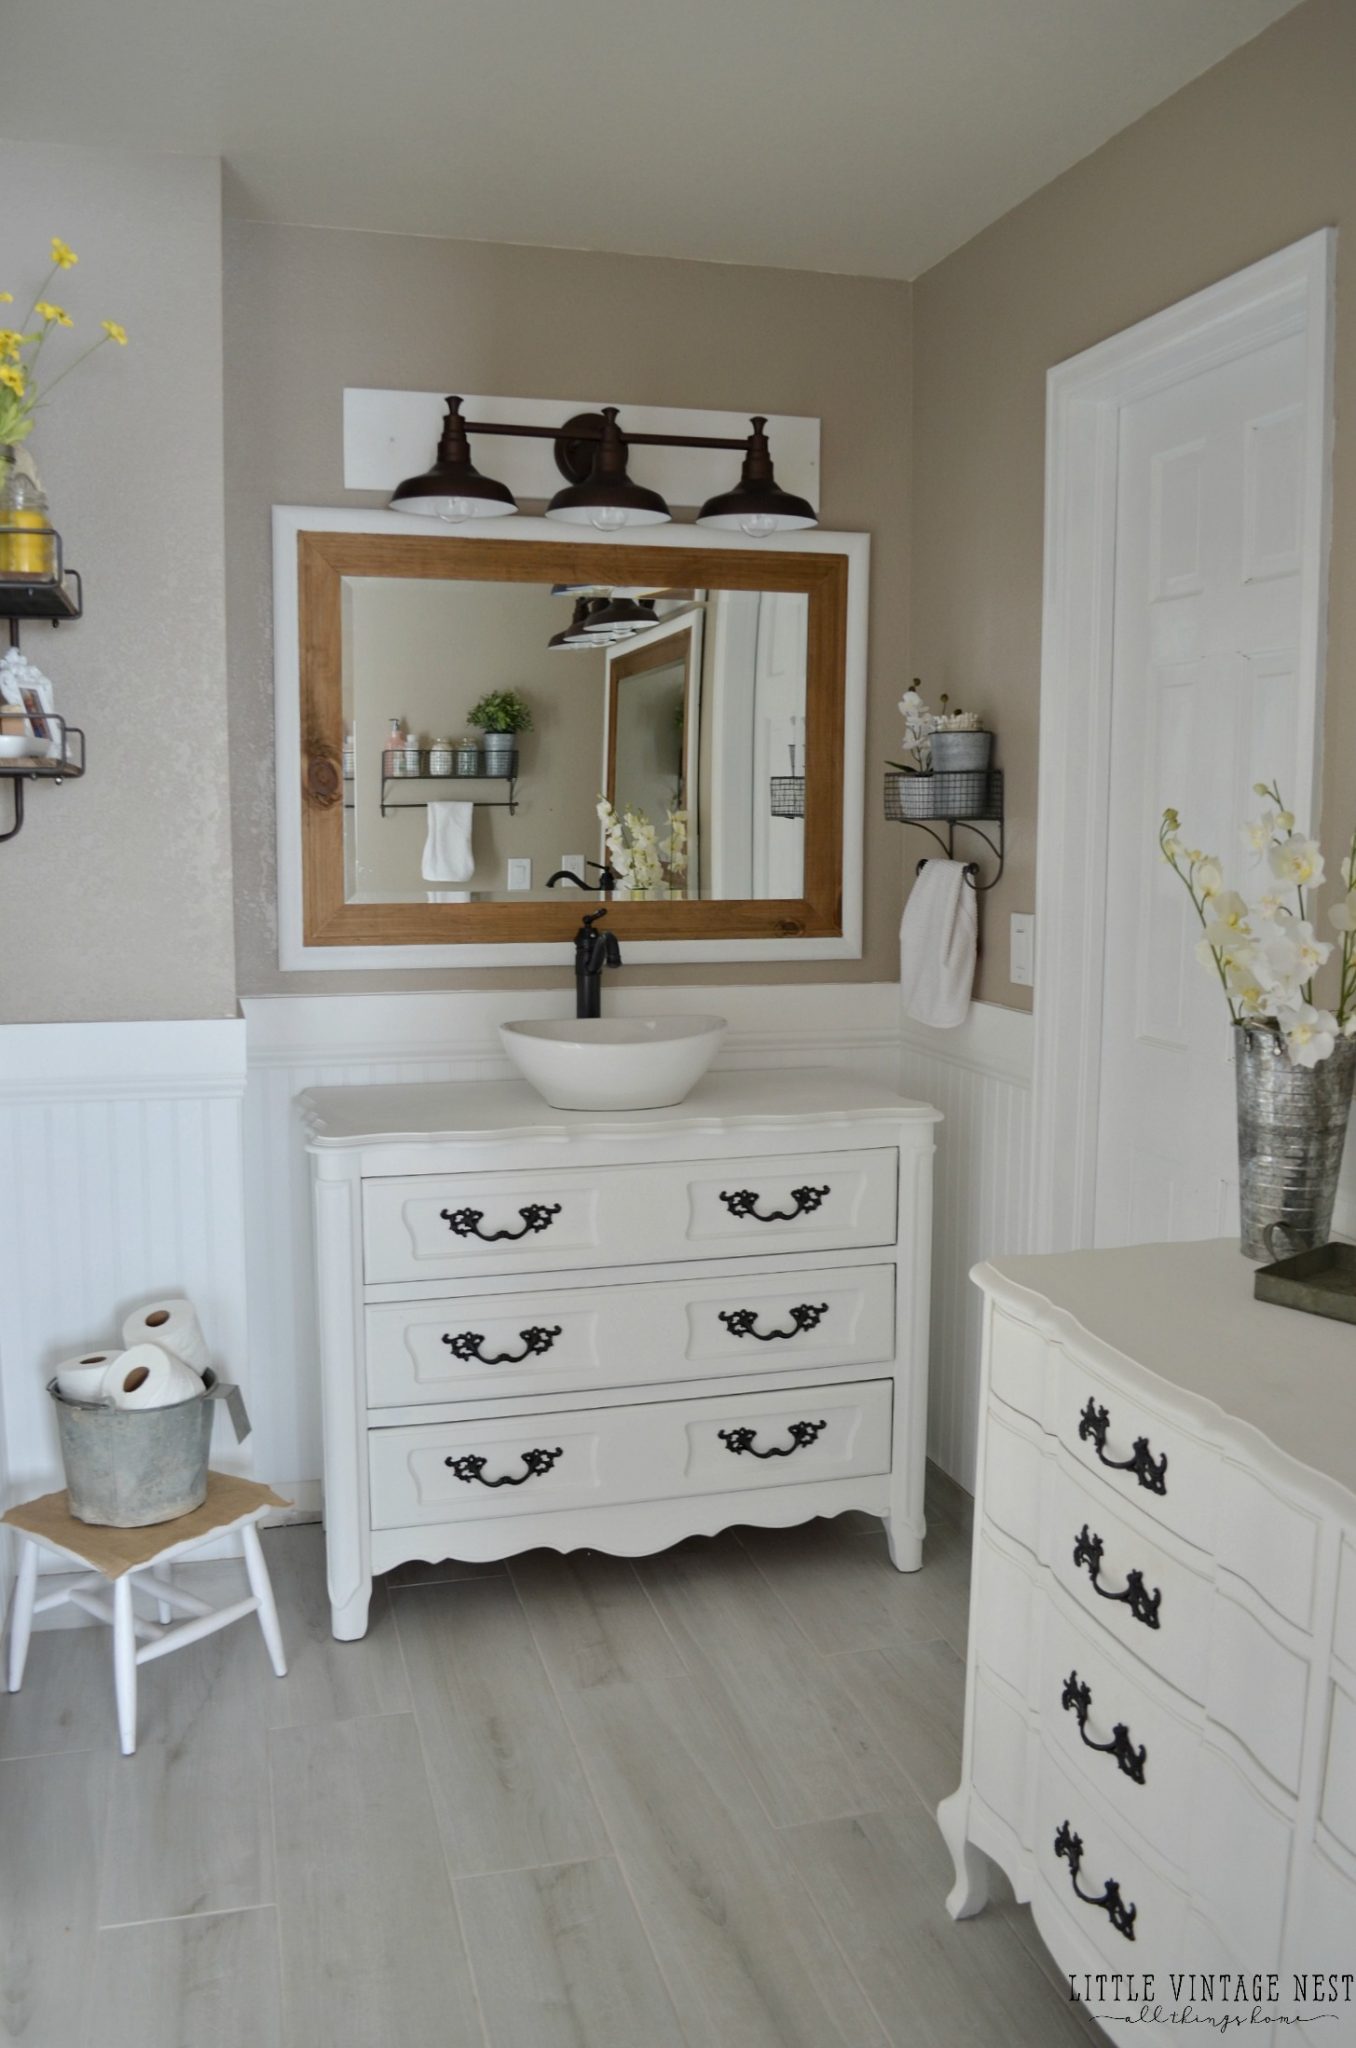 Using furniture, like a dresser, as a bathroom vanity is a rustic bathroom decor idea that is perfect for farmhouse style